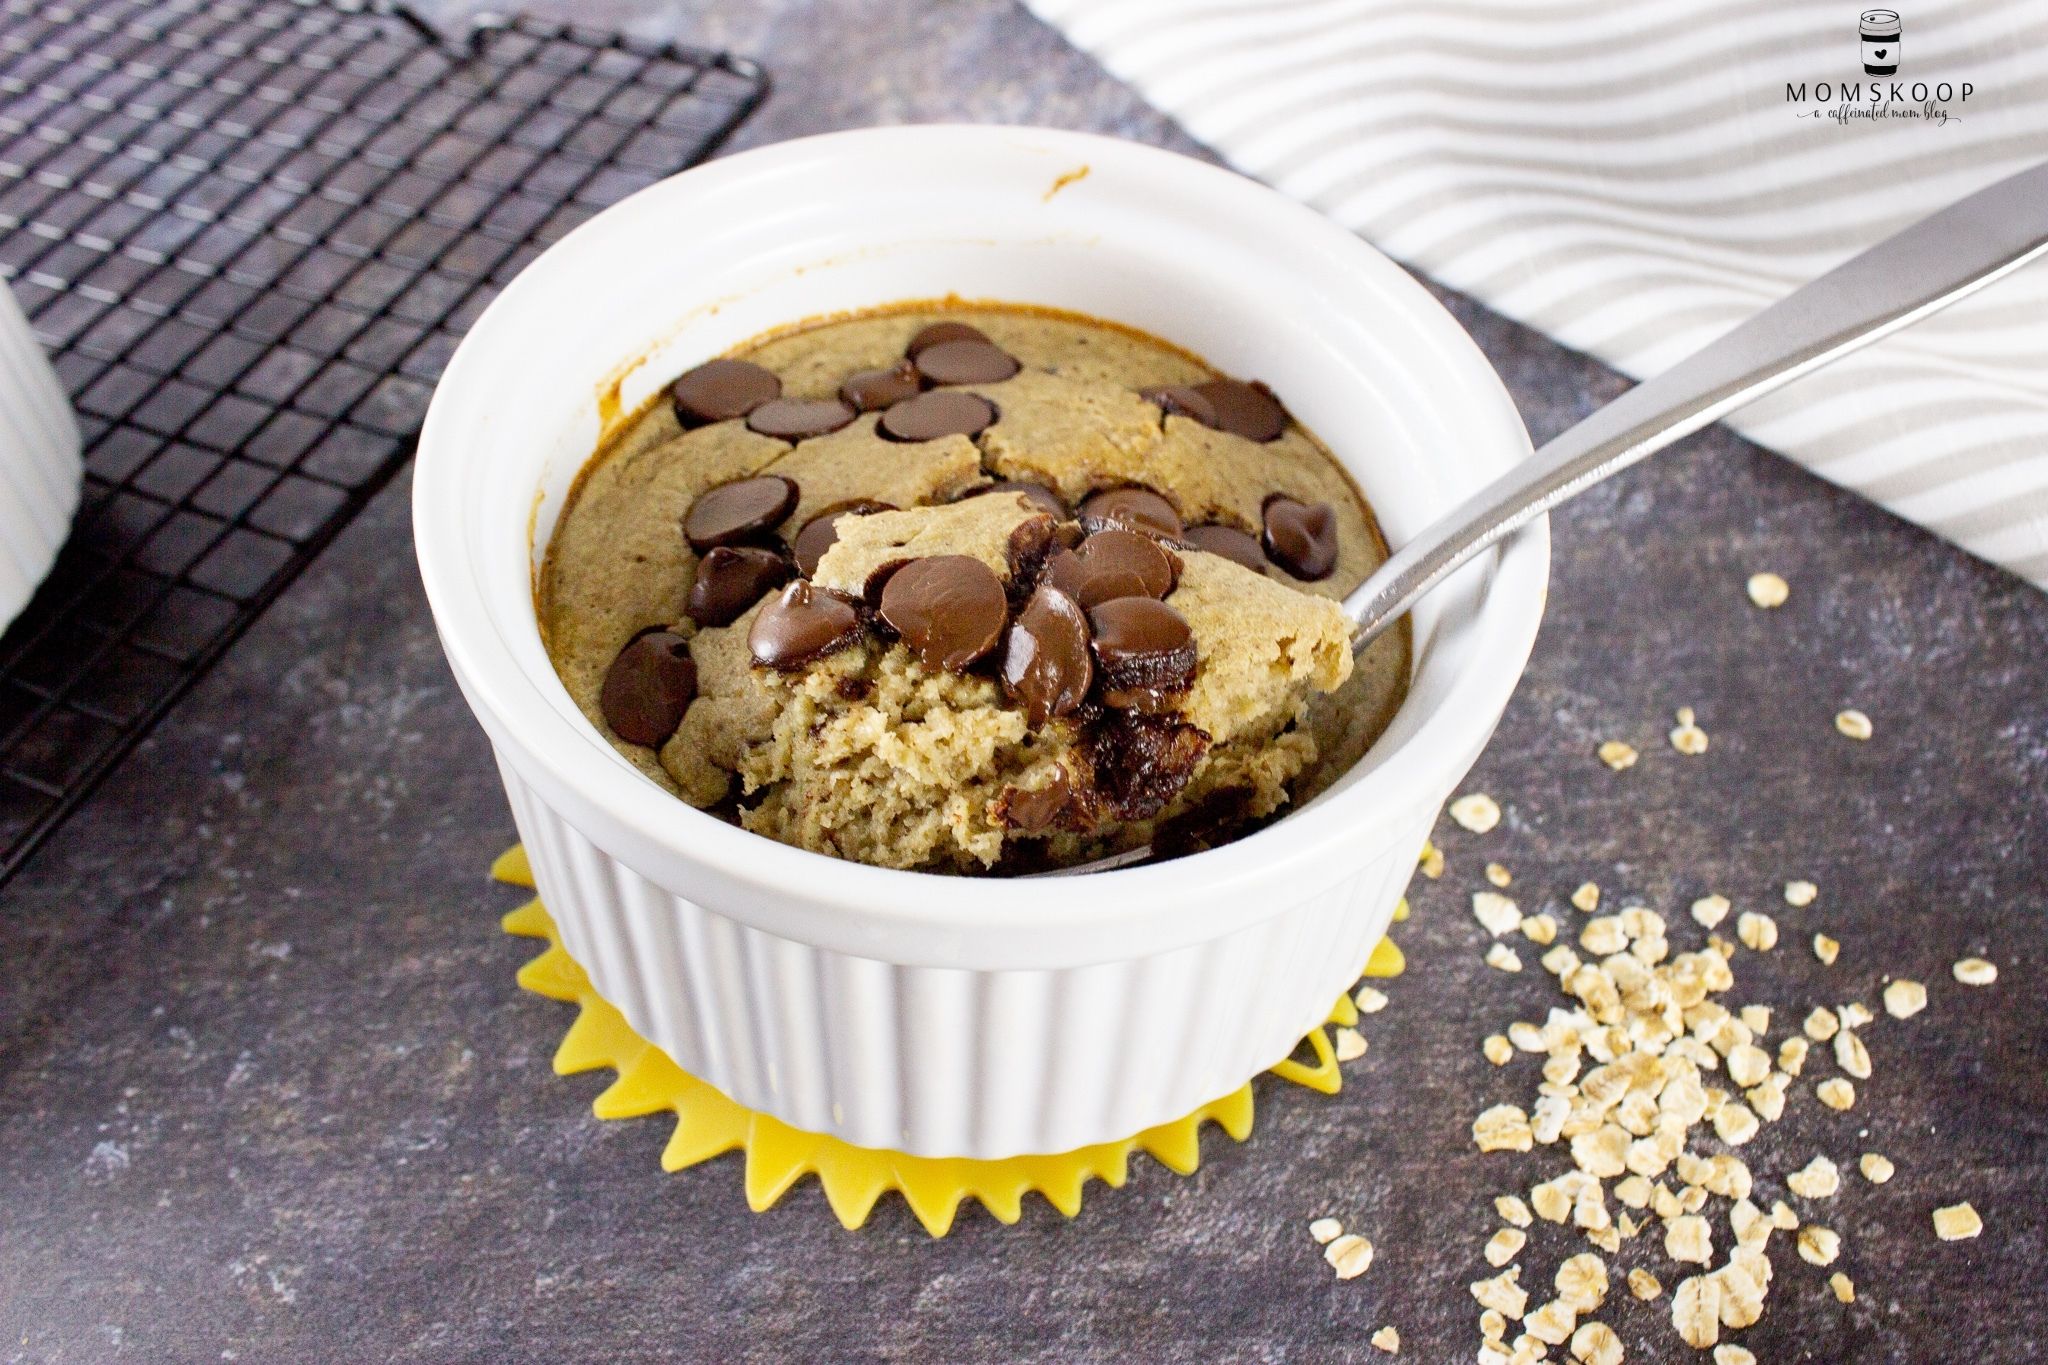 A white ramekin full of blended baked oats and topped with chocolate chips